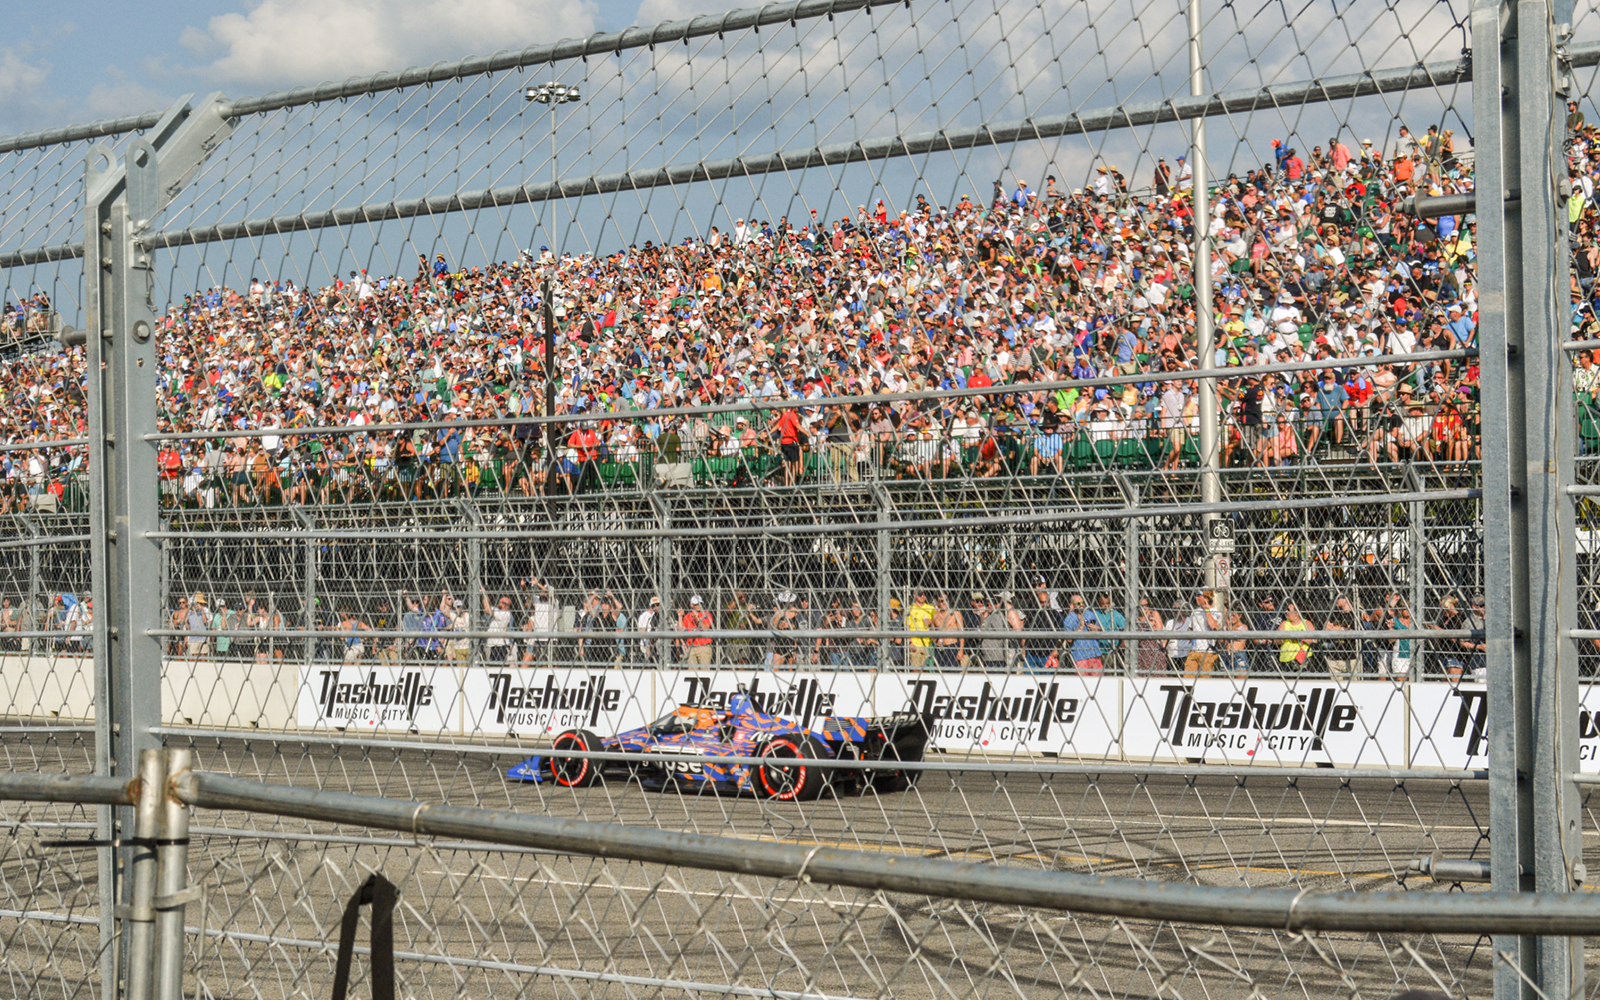 grandstands packed with people watching the main event: the Big Machine Music City Grand Prix